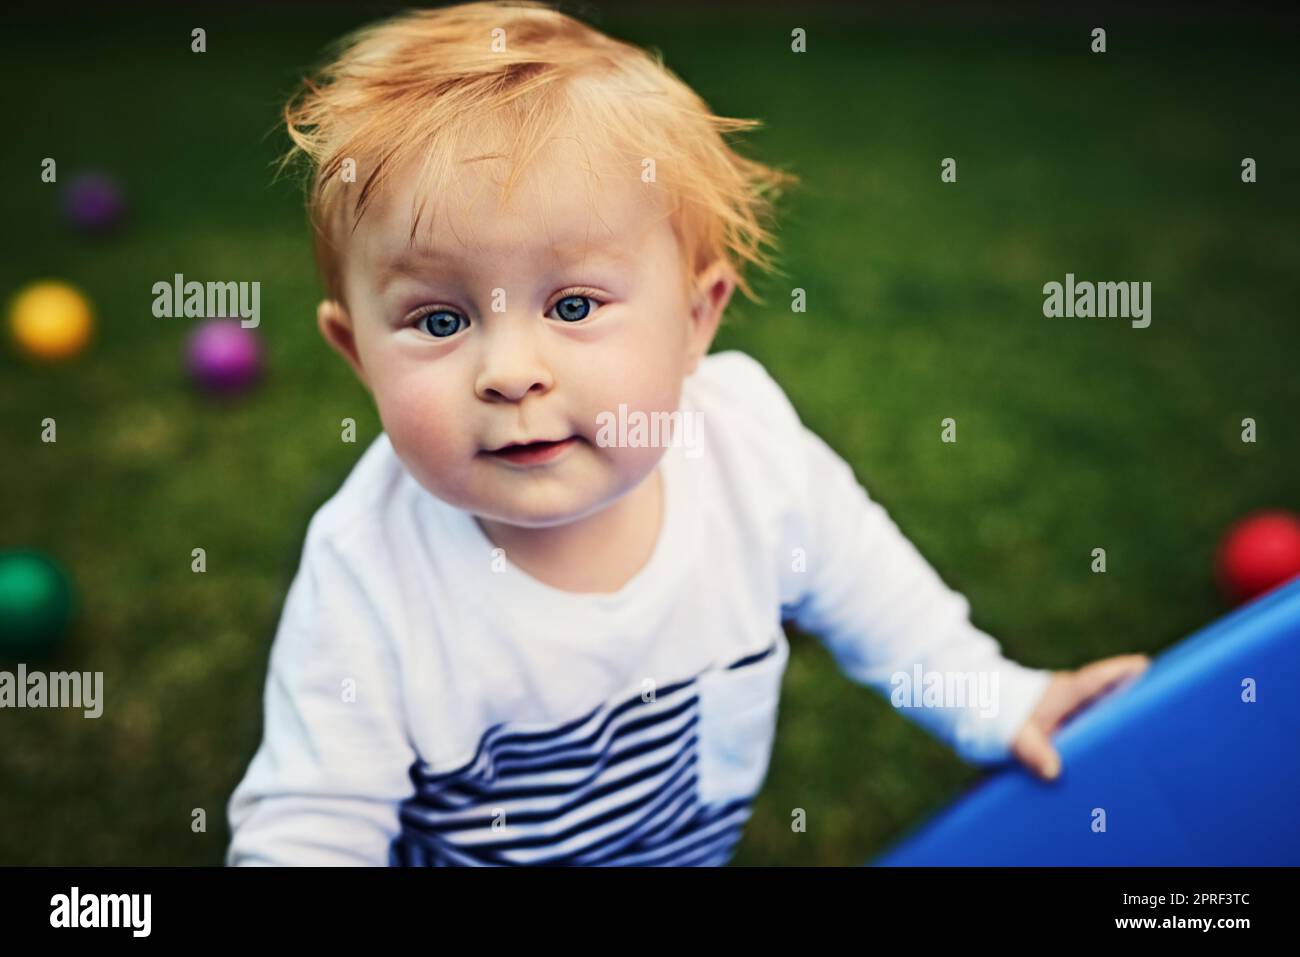 Little boys just want to have fun. an adorable little boy playing in the backyard. Stock Photo